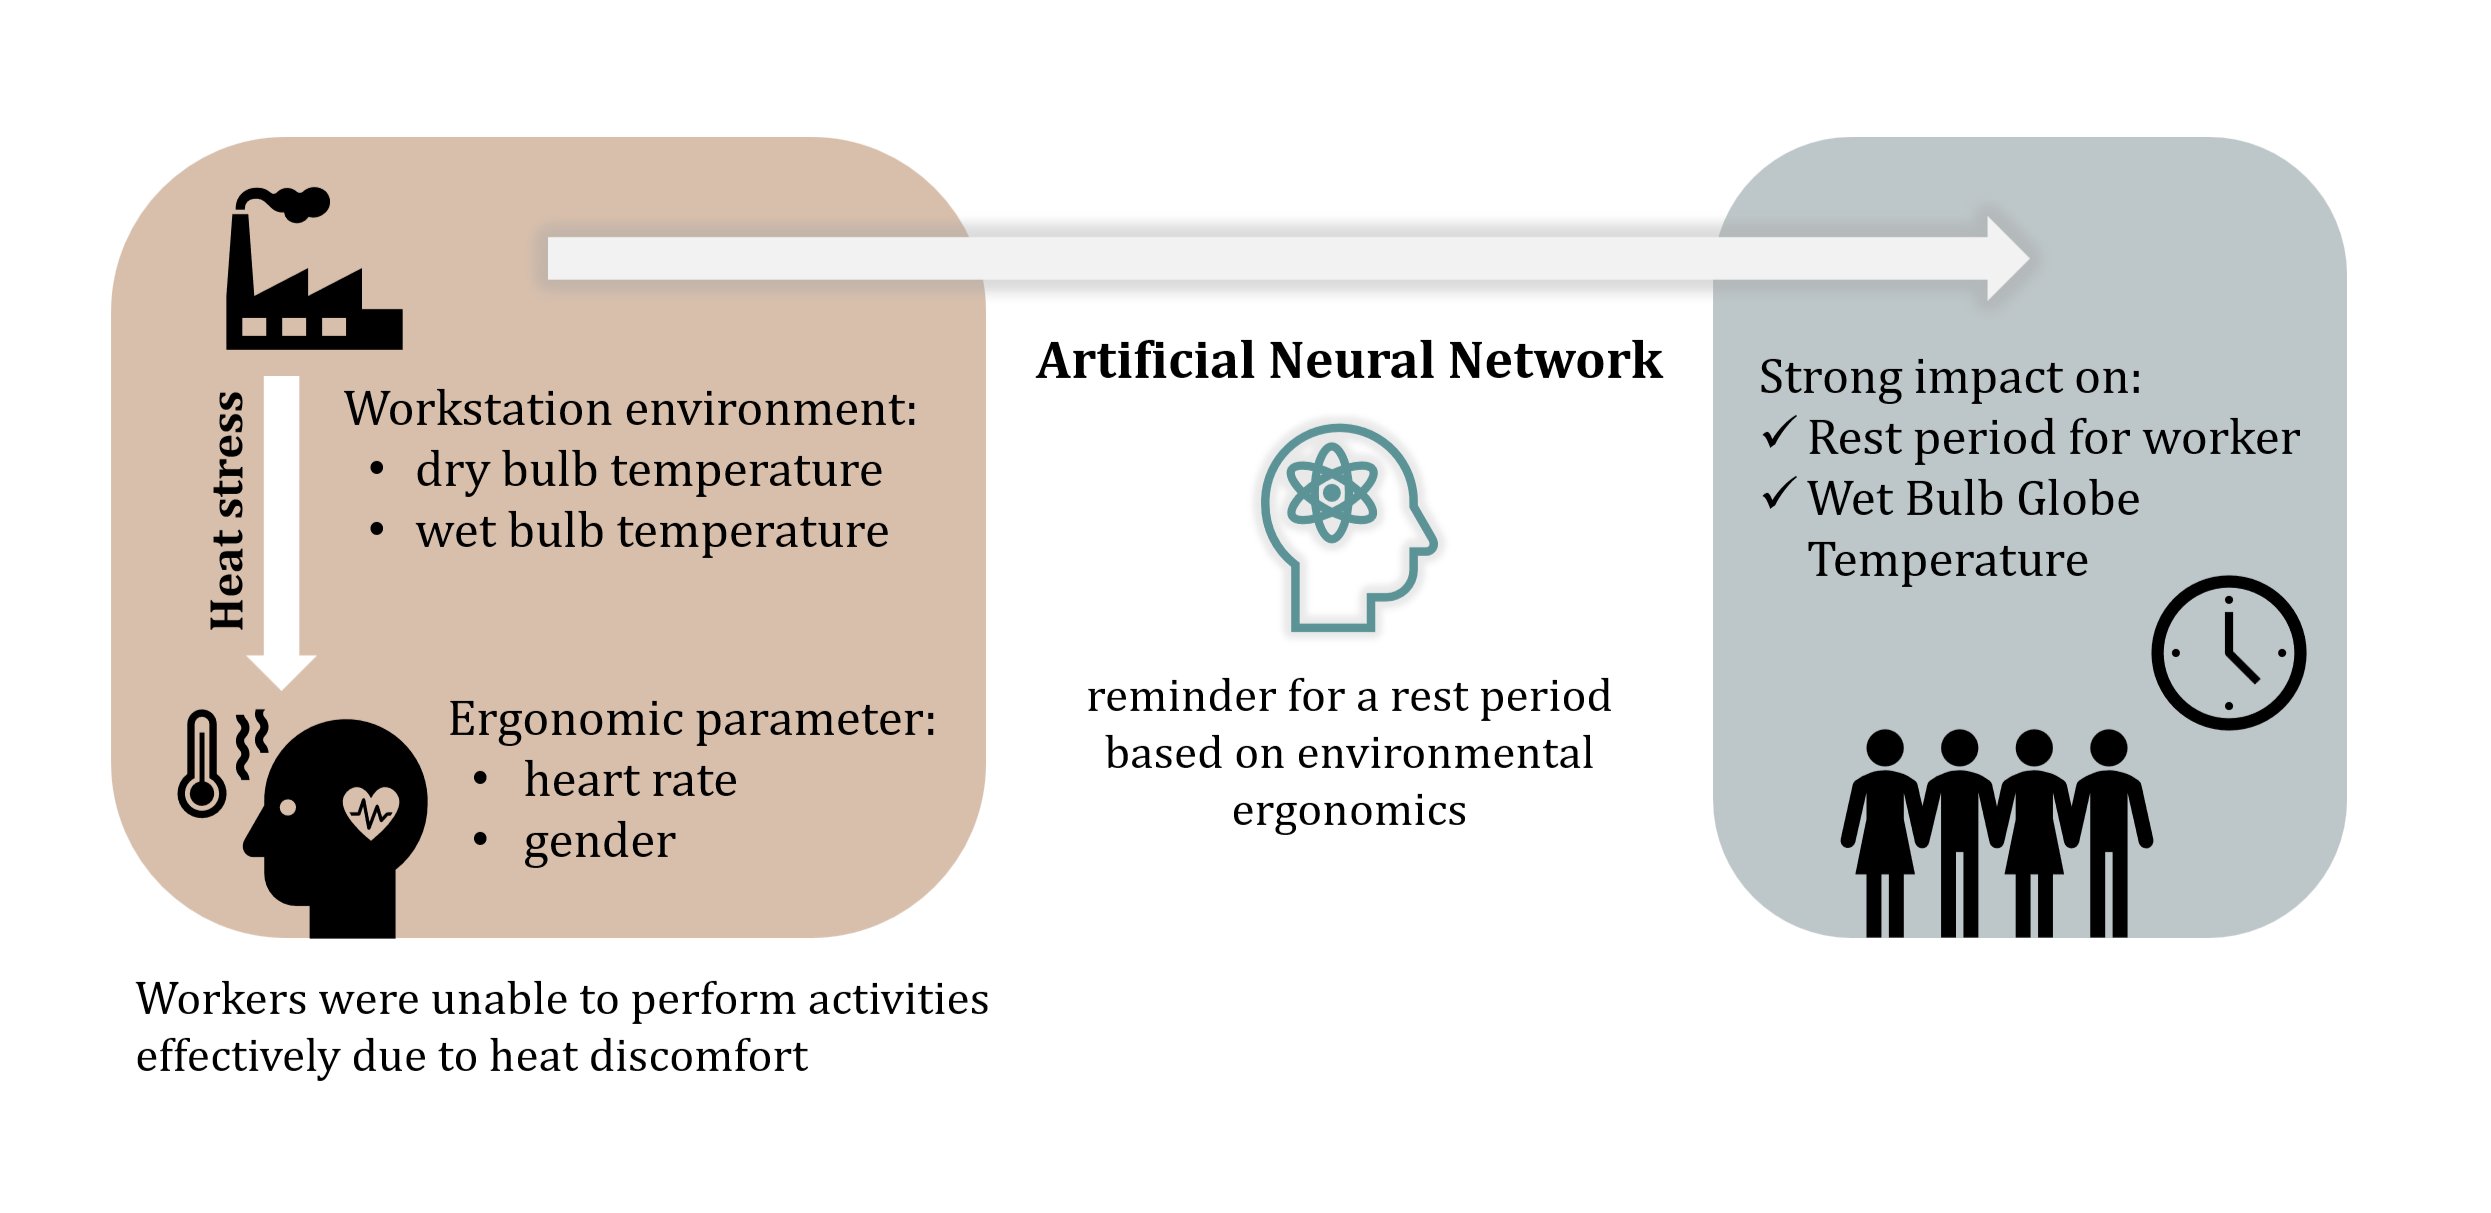 Index terms: Artificial neural networks; Labor; Rest period; Wet bulb globe temperature 